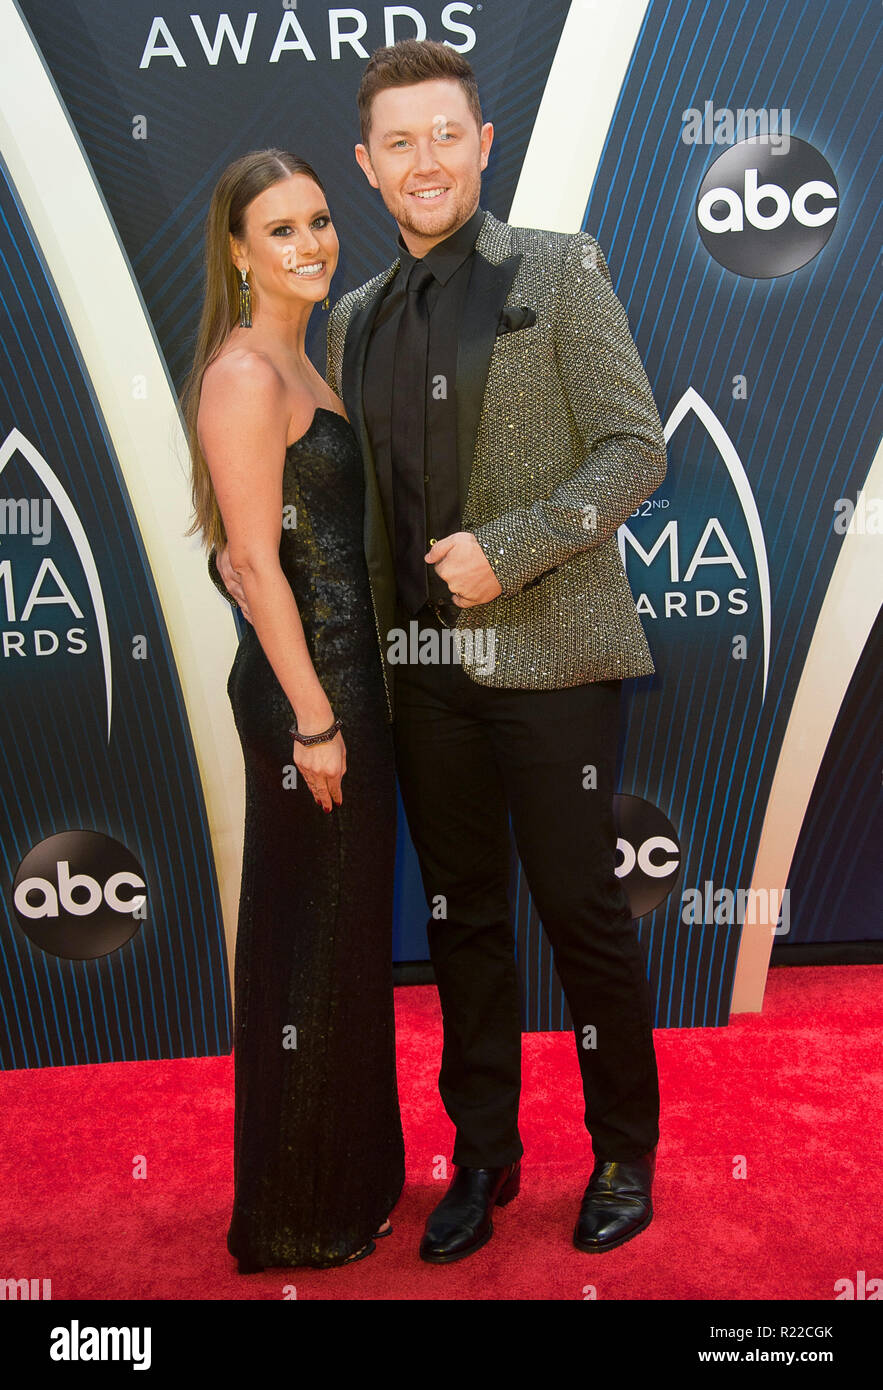 Nov. 14, 2018 - Nashville, Tennessee; USA - SCOTTY MCCREERY arrives at the 52nd Annual CMA Awards that took place at the Bridgestone Arena located in downtown Nashville. Copyright 2018 Jason Moore. Credit: Jason Moore/ZUMA Wire/Alamy Live News Stock Photo